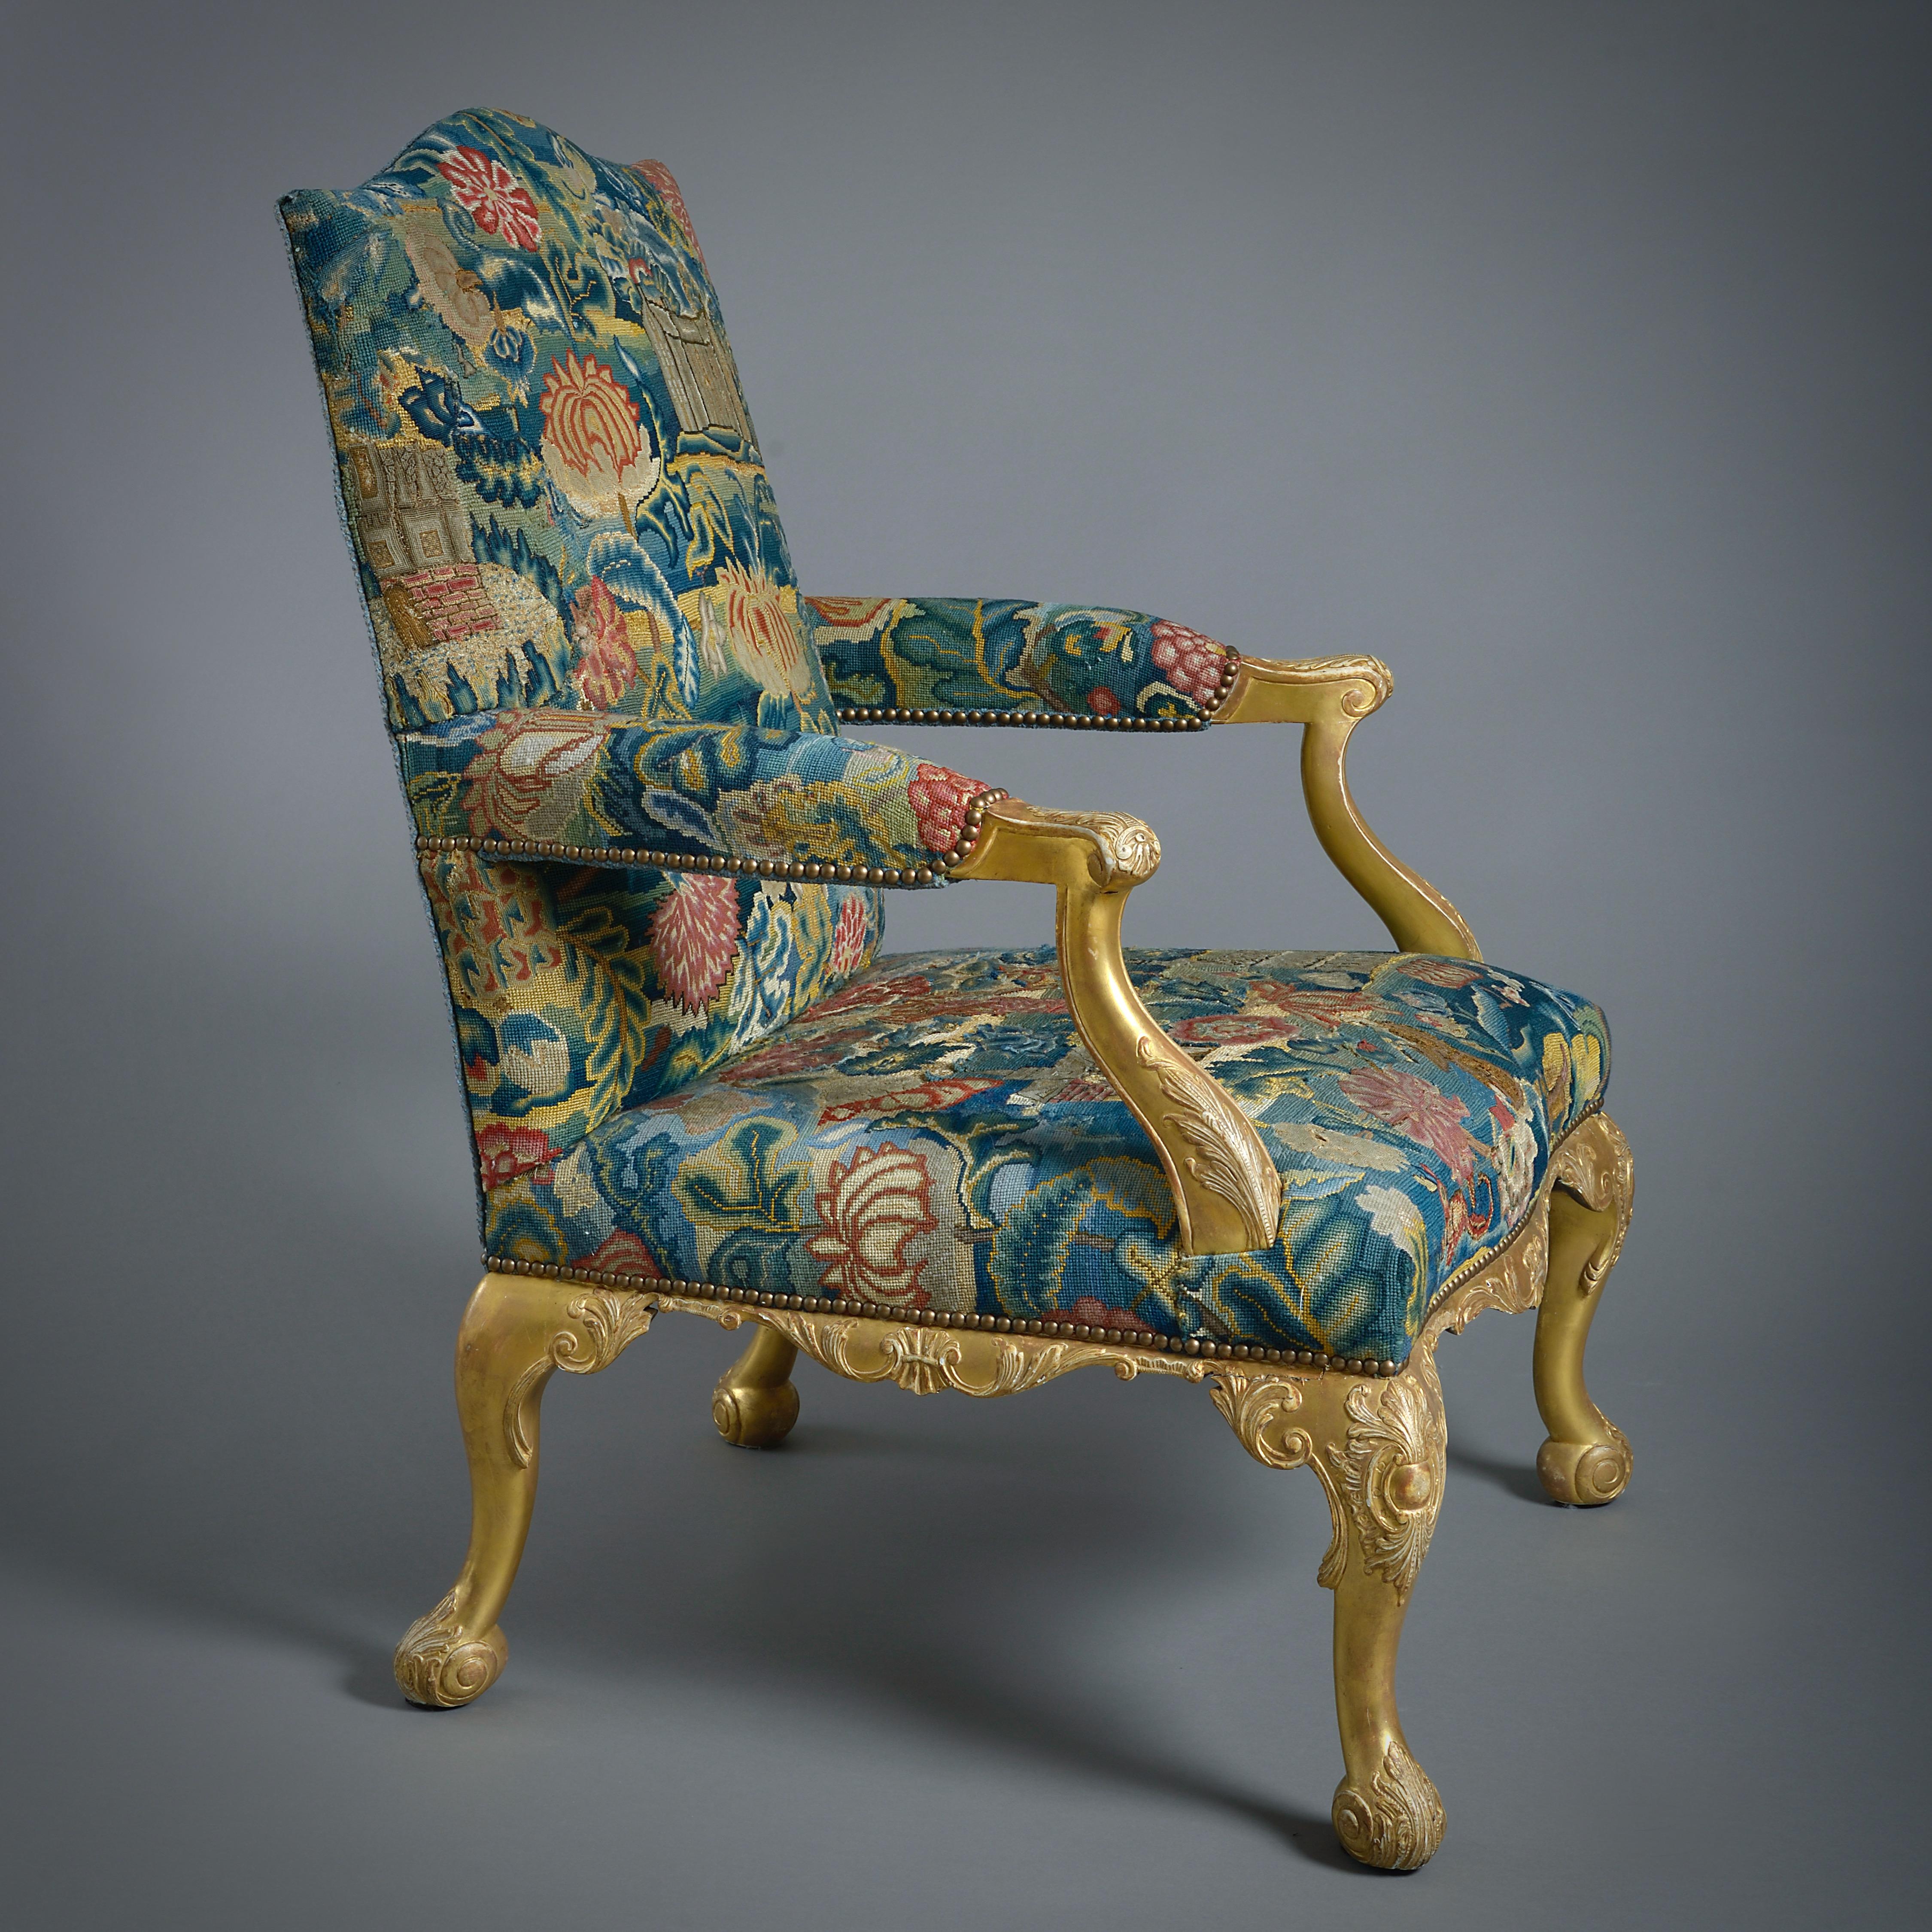 A FINE GEORGE II GILTWOOD LIBRARY CHAIR, UPHOLSTERED IN ASSOCIATED 18TH CENTURY NEEDLEWORK, Circa 1760.